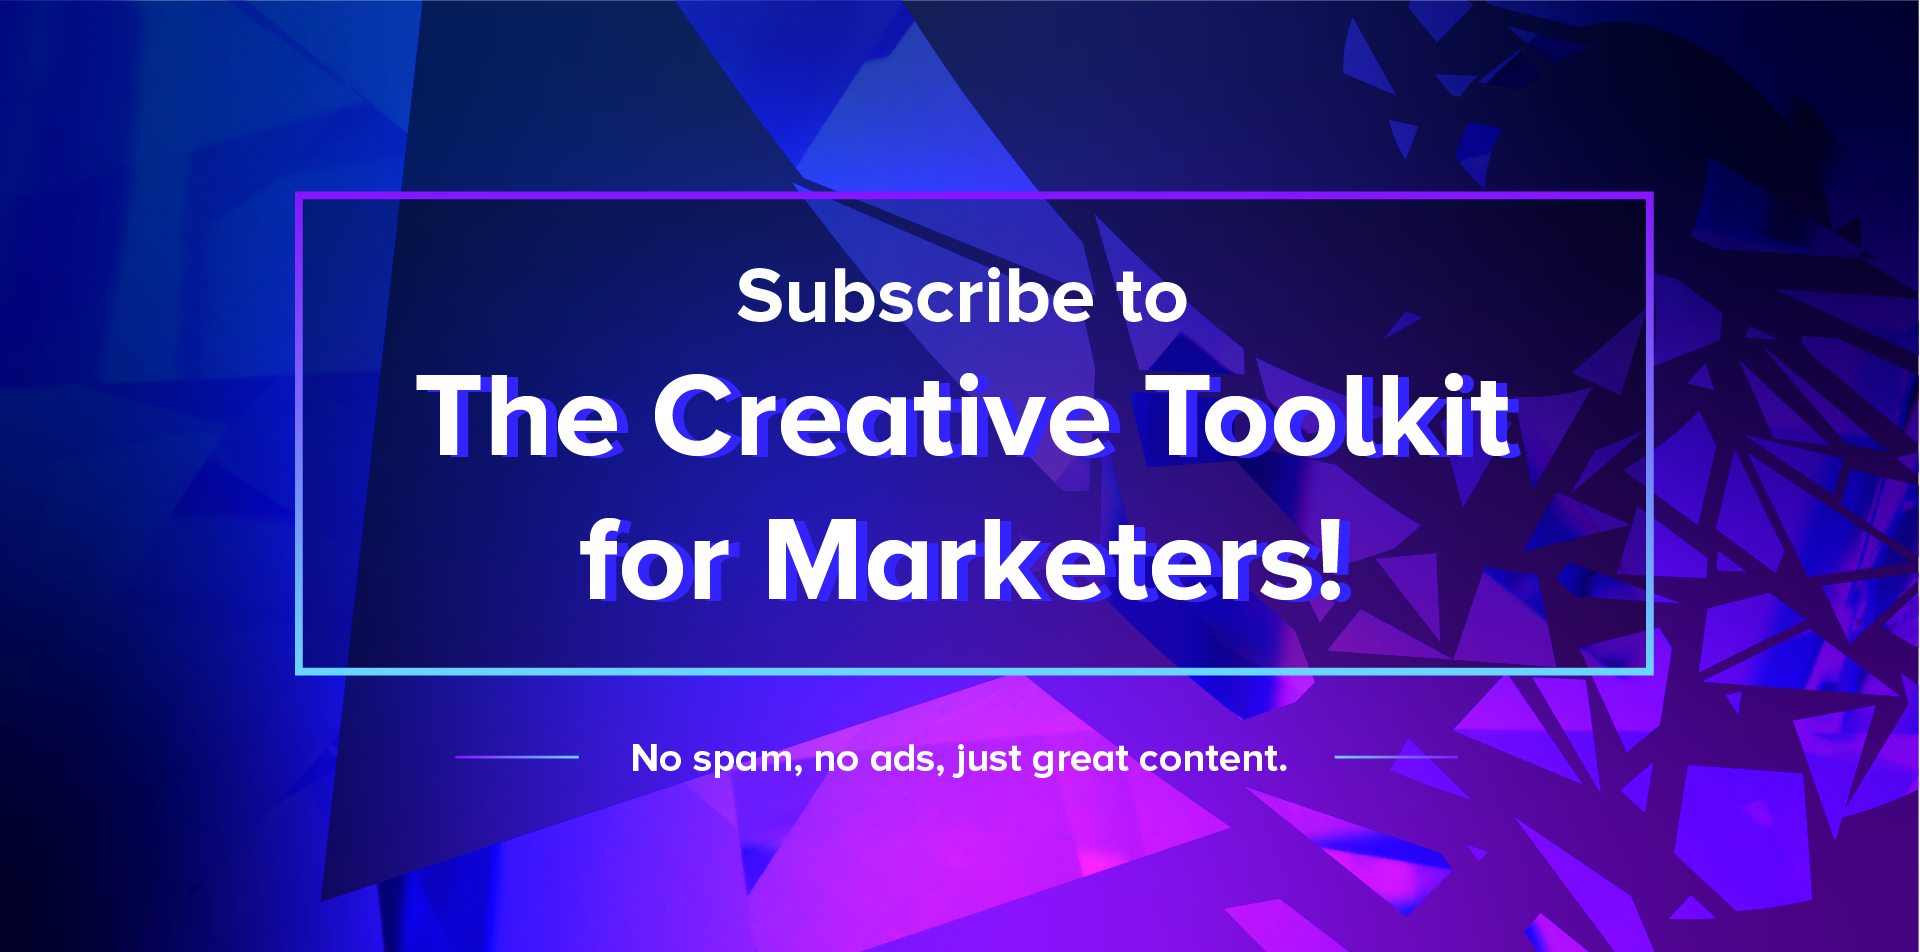 Subscribe to the Creative Toolkit for Marketers